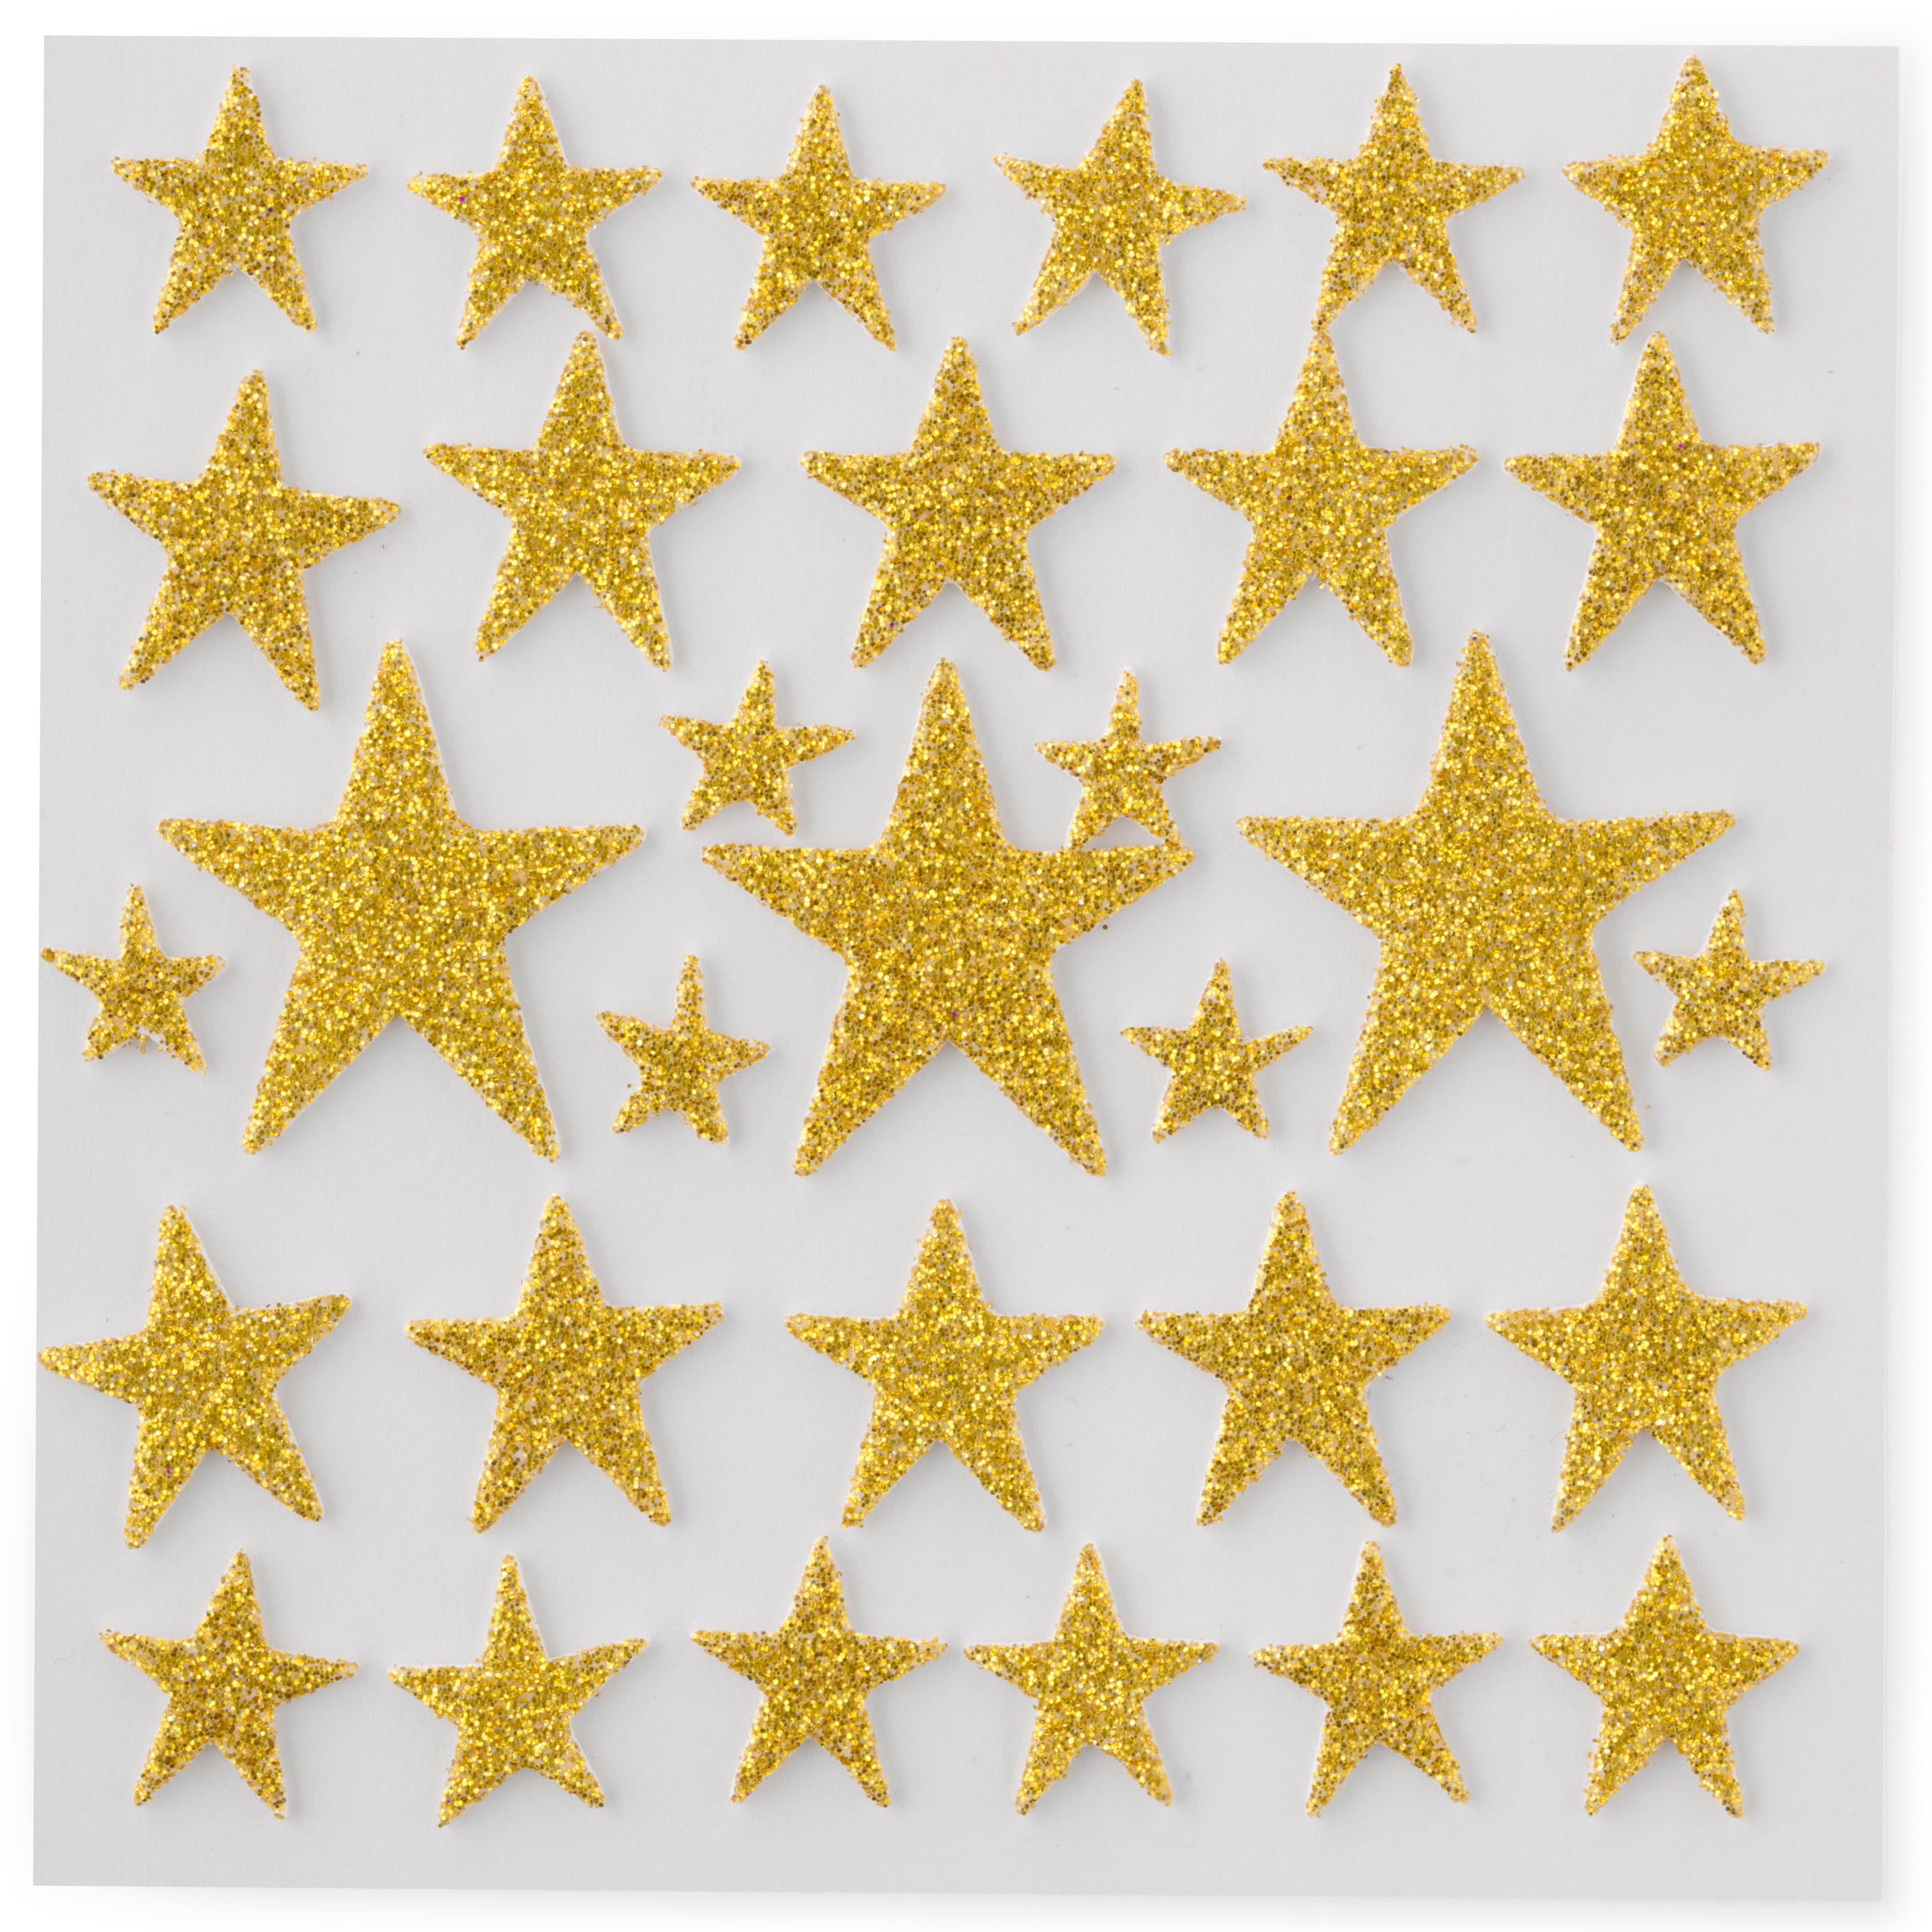 Small Buy $10=Free Shipping! Gold Glittered 3D Star Ornament 